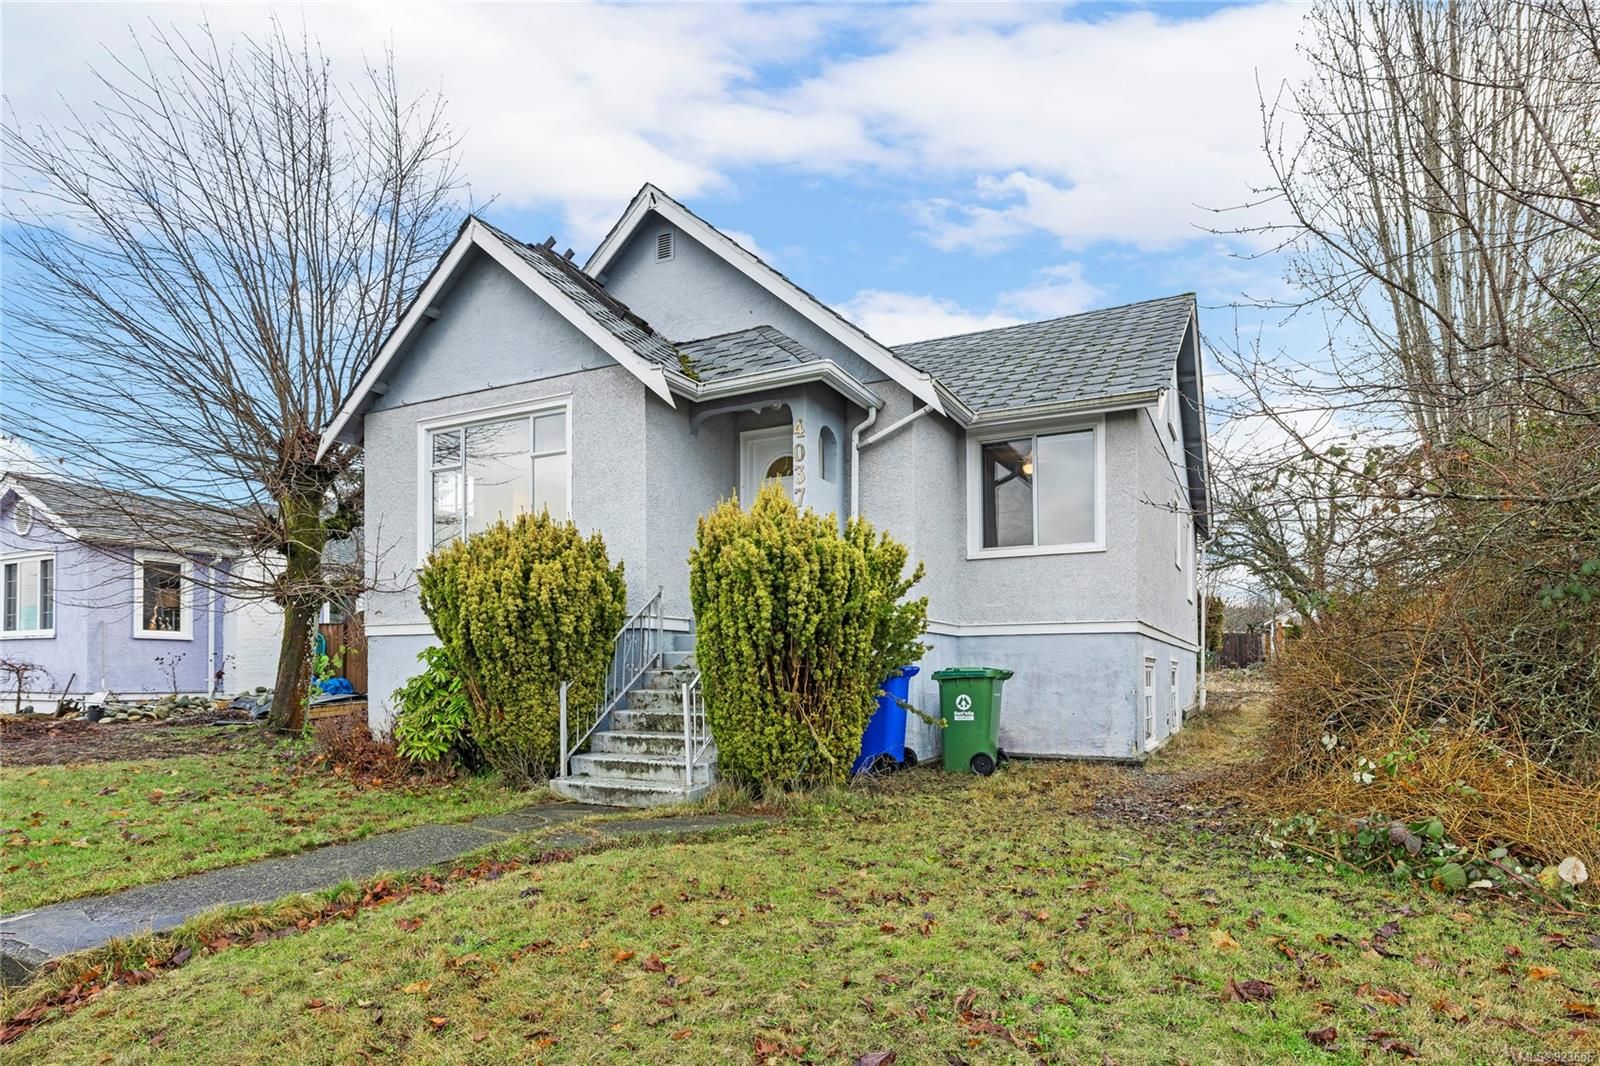 I have sold a property at 4037 9th Ave in Port Alberni
